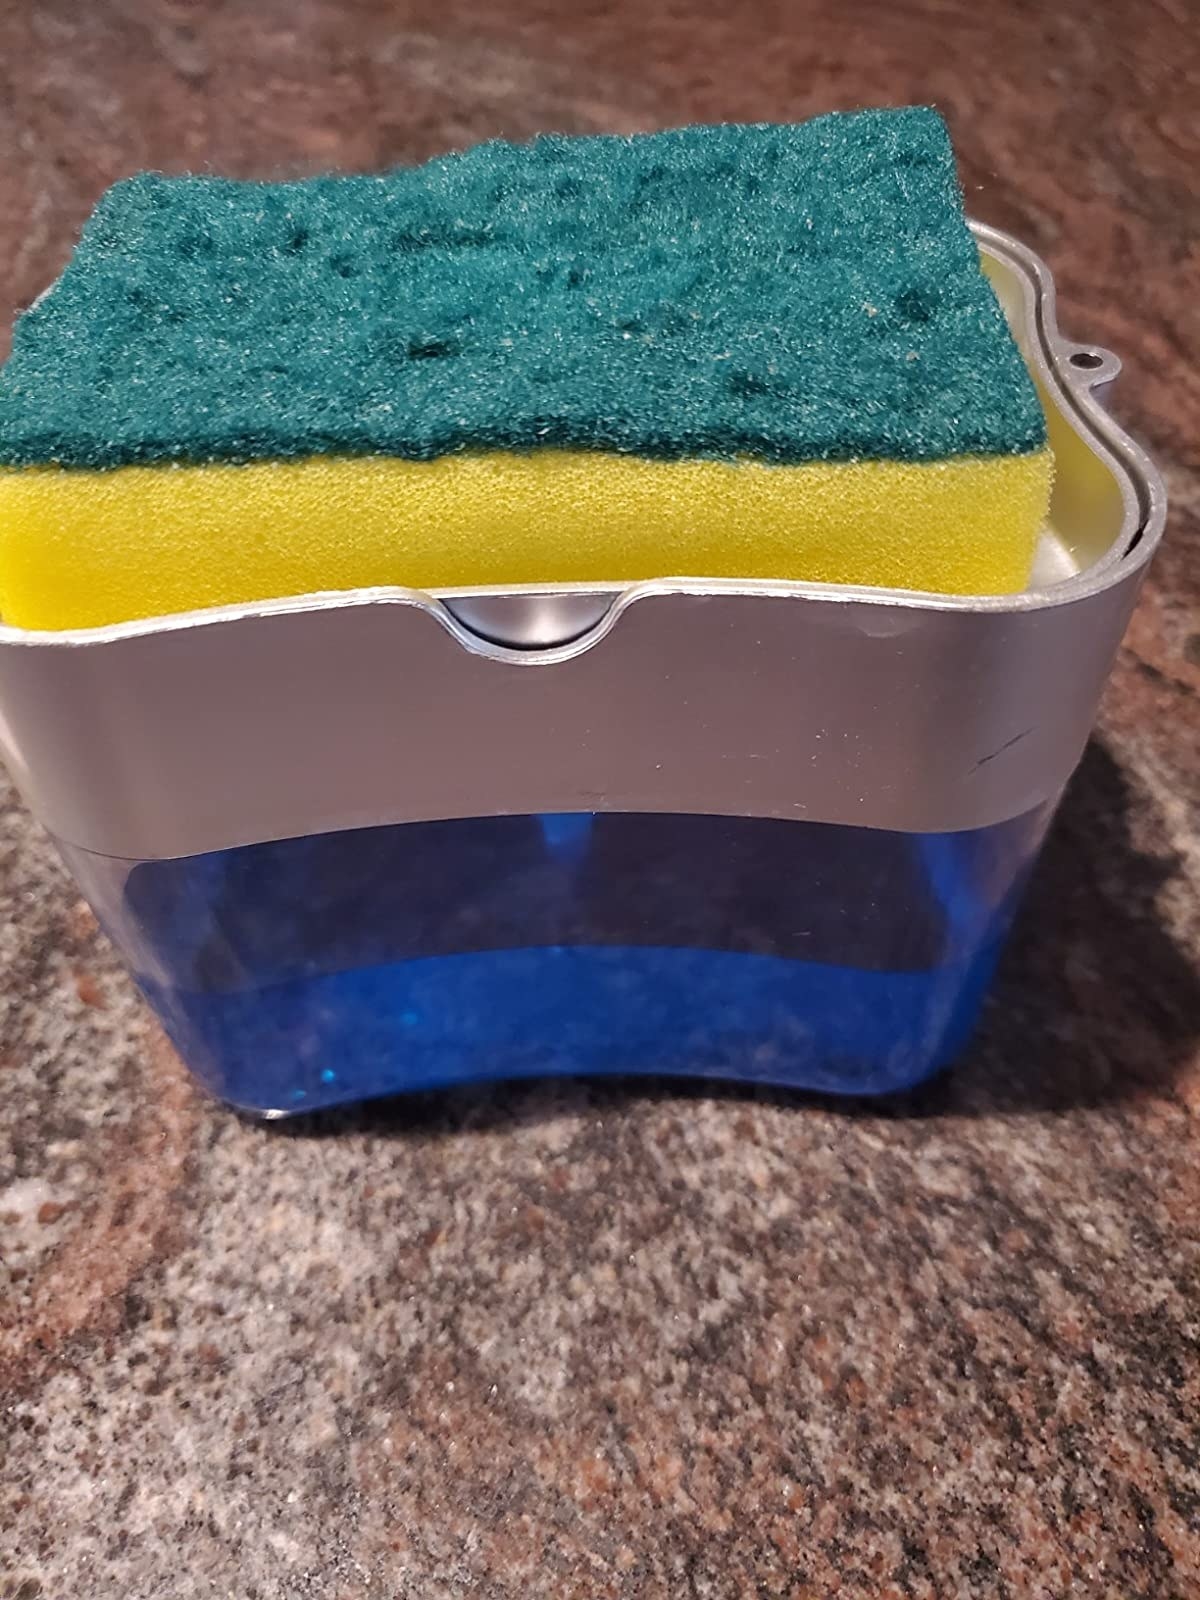 The sponge holder with a sponge resting on top and soap in the bottom half